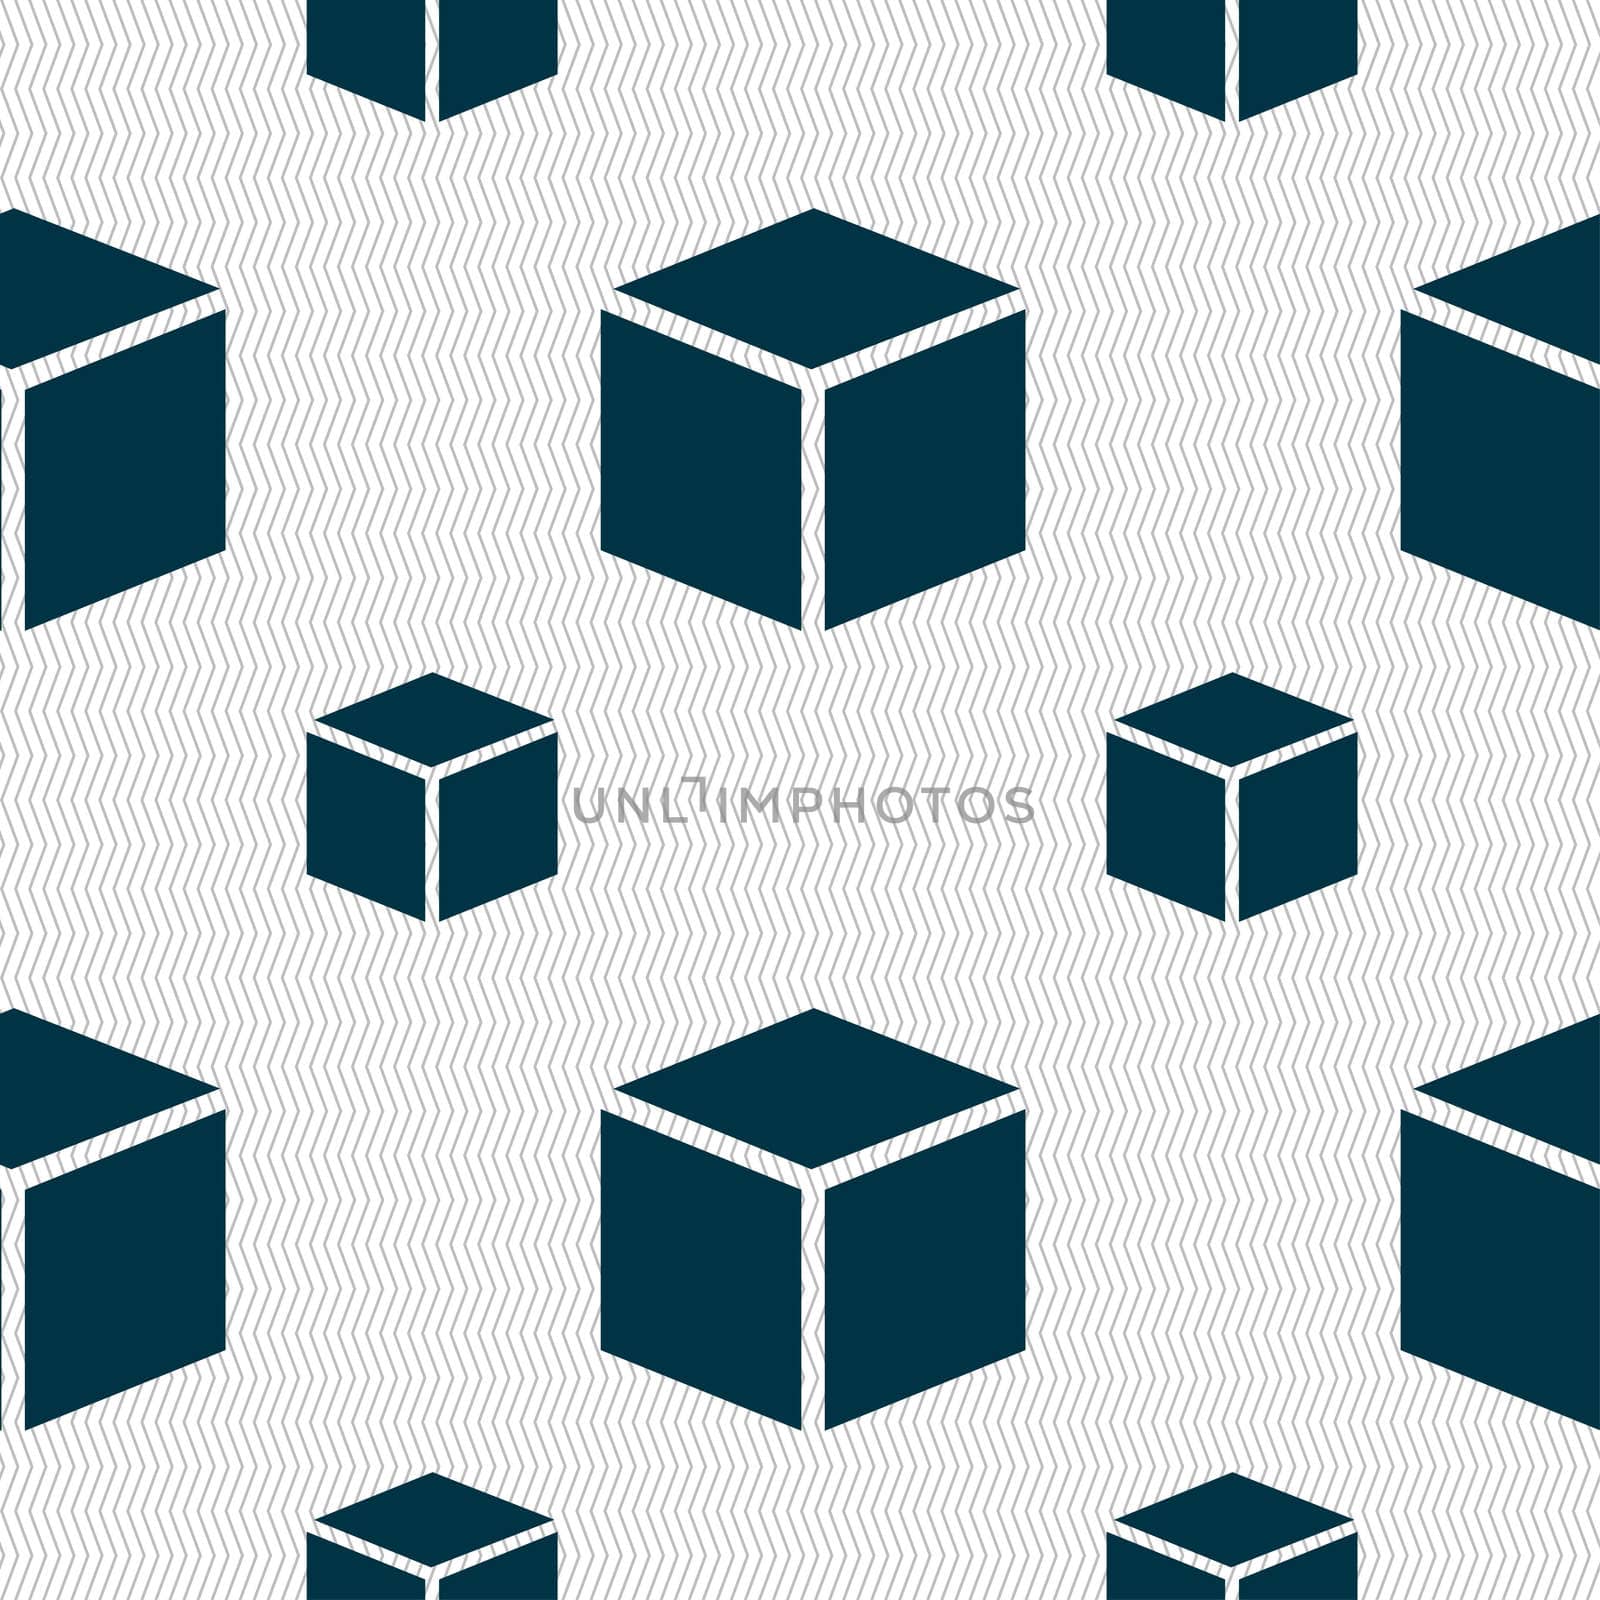 3d cube icon sign. Seamless pattern with geometric texture. illustration